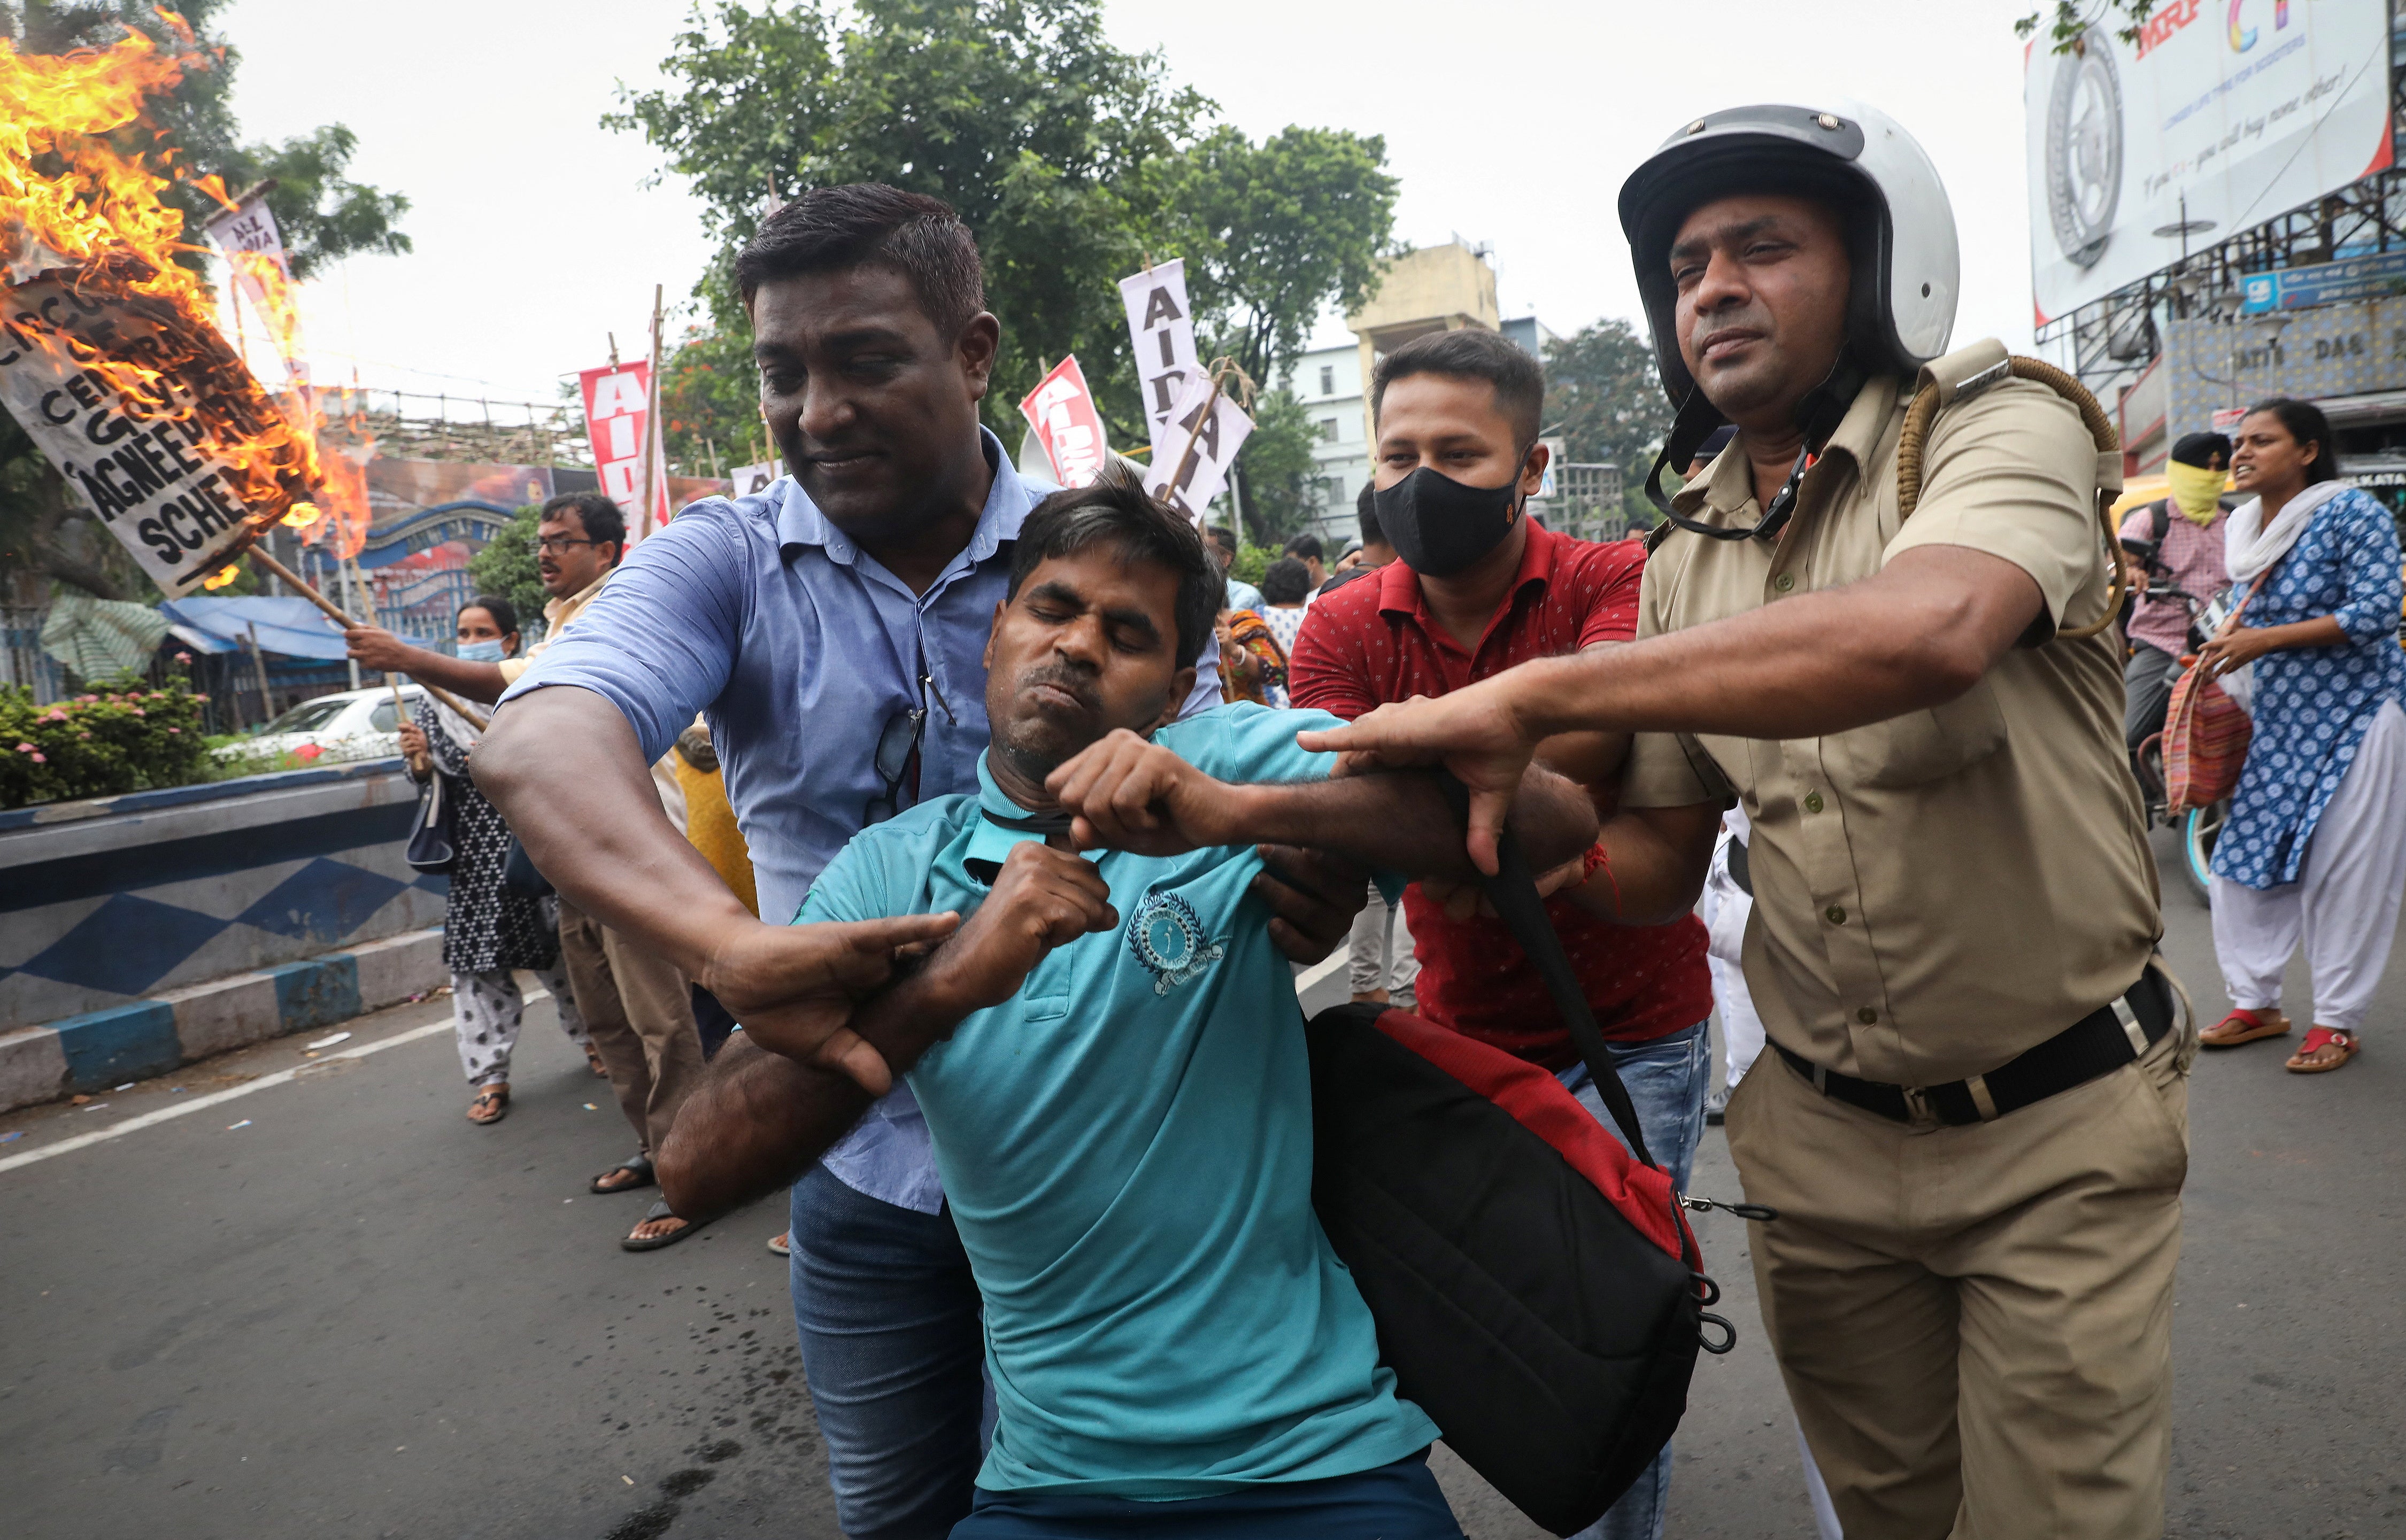 Police detain a demonstrator during a protest against the “Agnipath” scheme